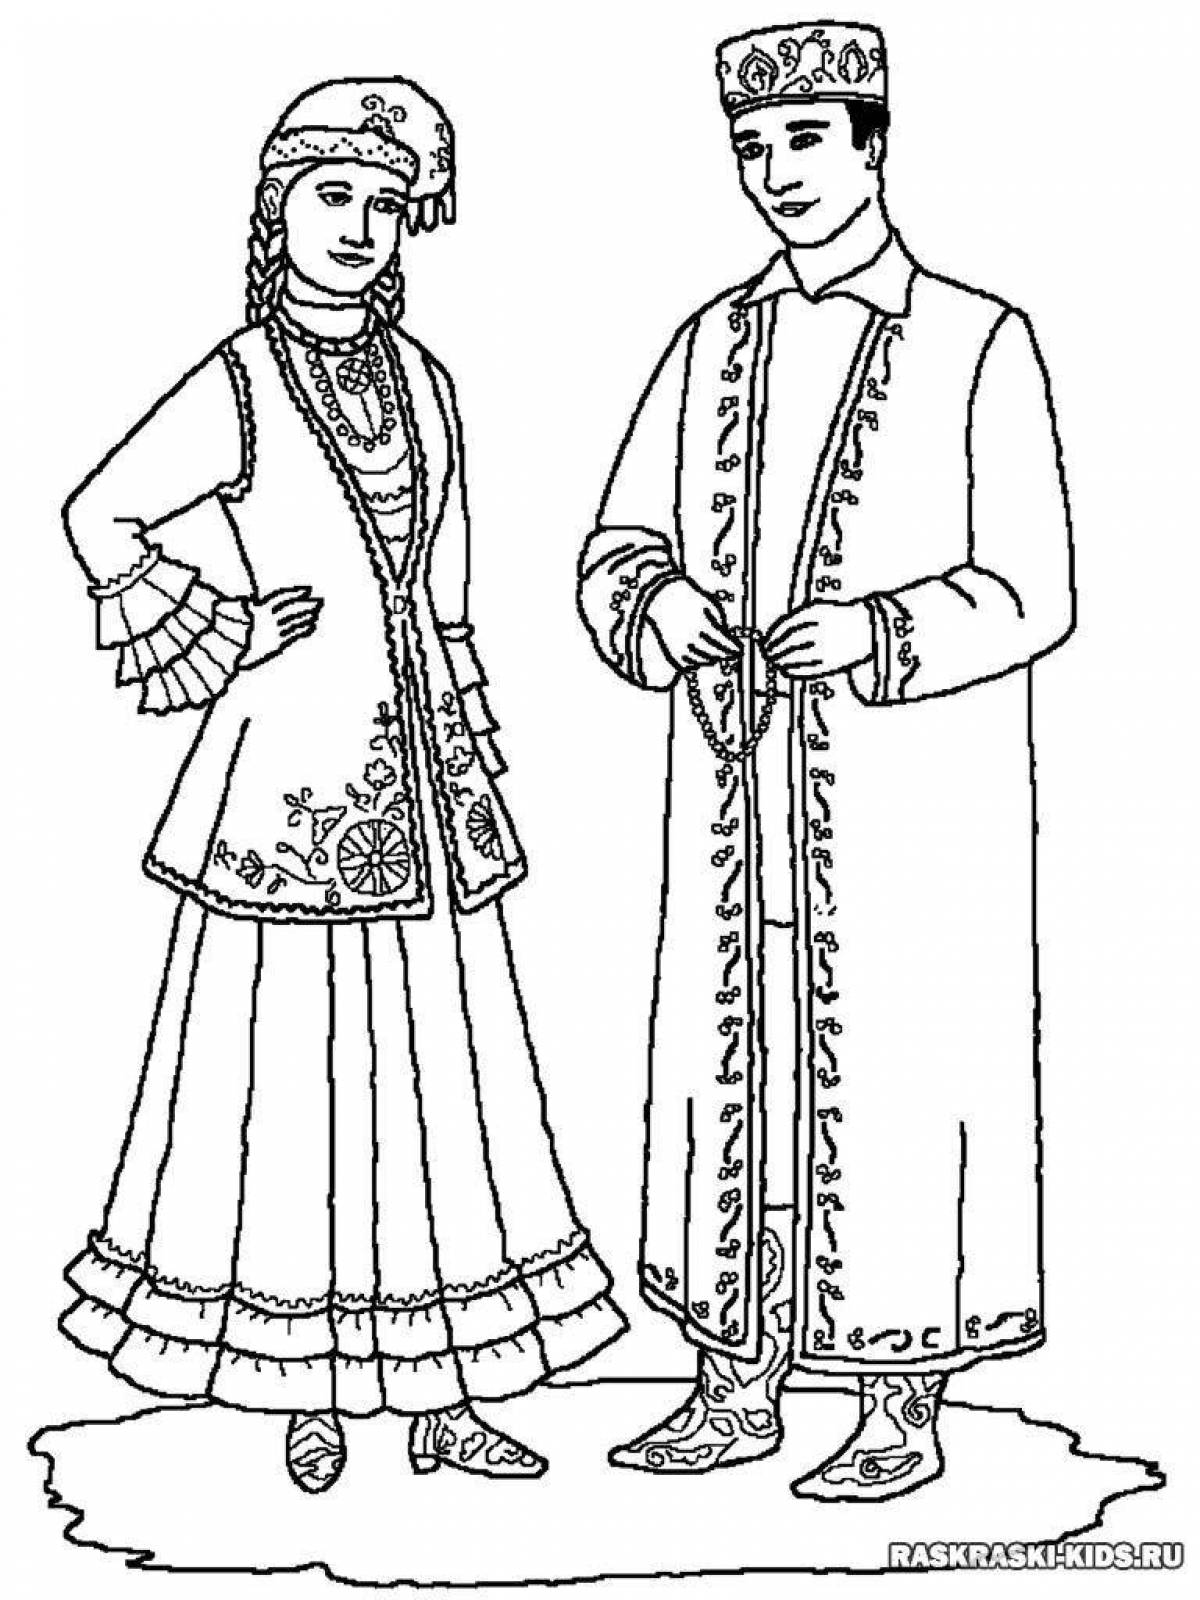 Coloring page shiny folk costumes